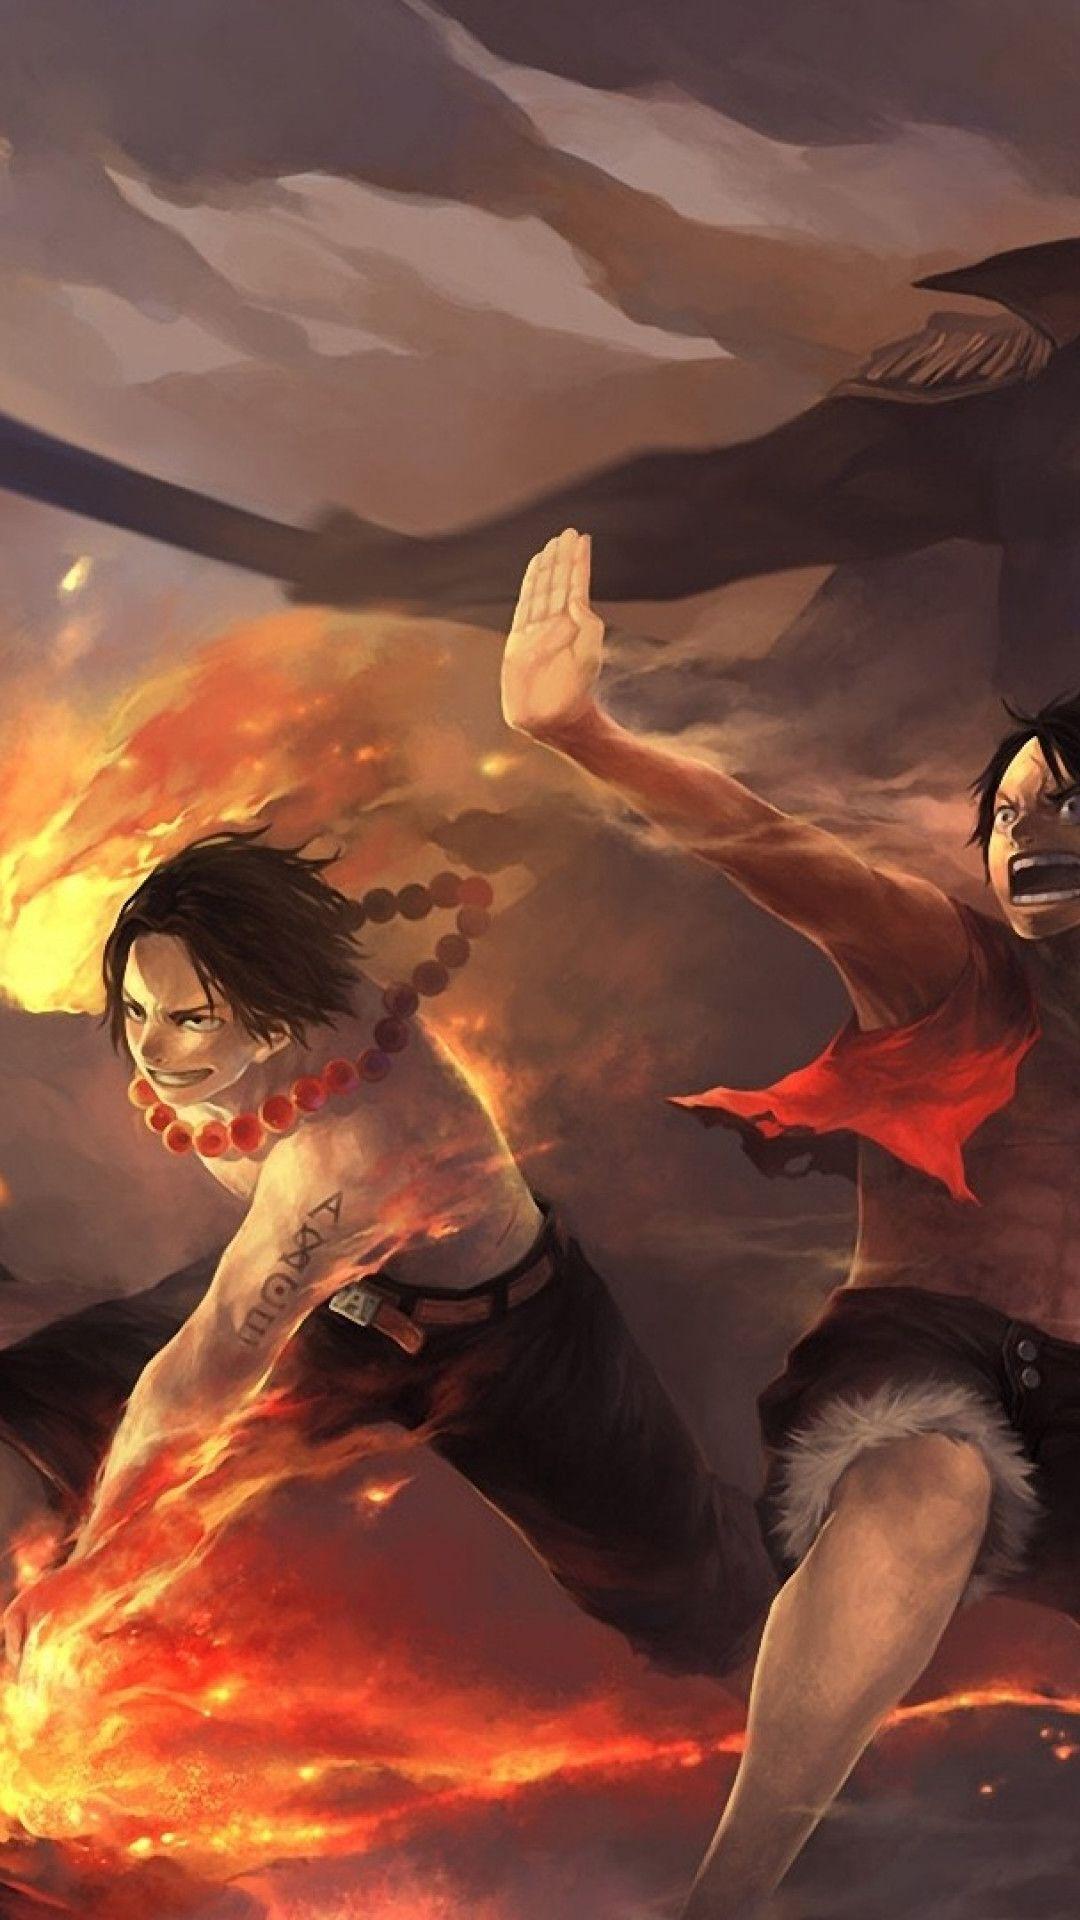 HD wallpaper One Piece Luffy Ace and Sabbo wallpaper Monkey D Luffy  Sabo  Wallpaper Flare